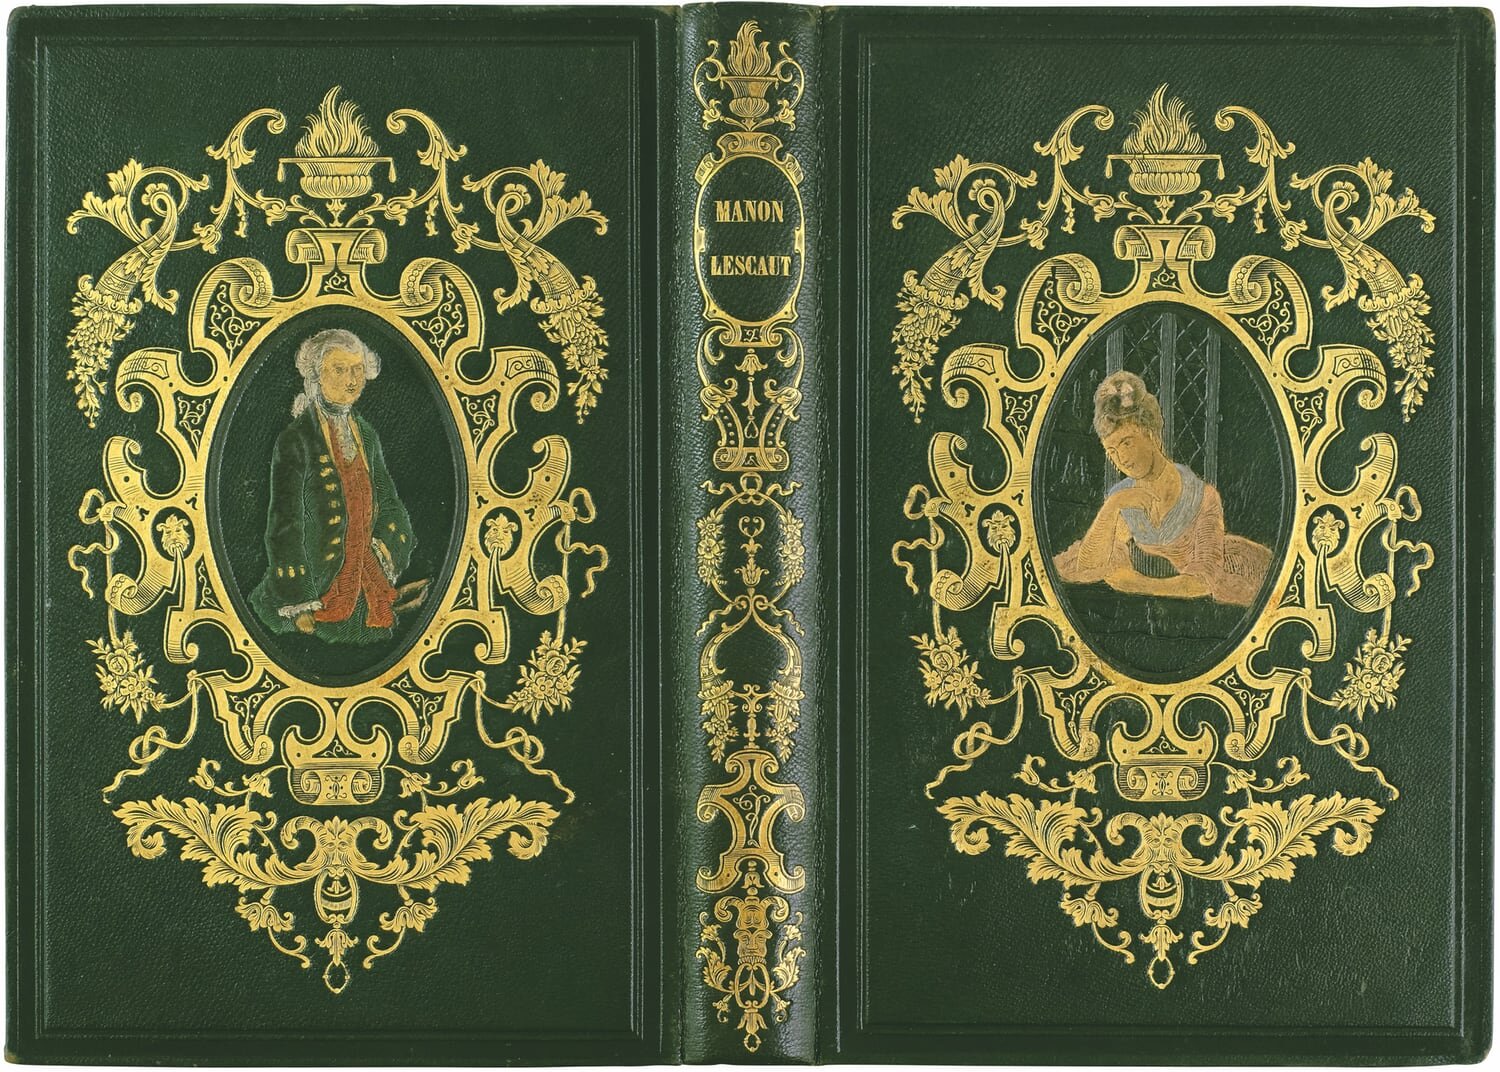   Manon Lescaut  in two examples of its publisher’s binding by Boutigny; in red and green morocco [nos. 511 and 512] 